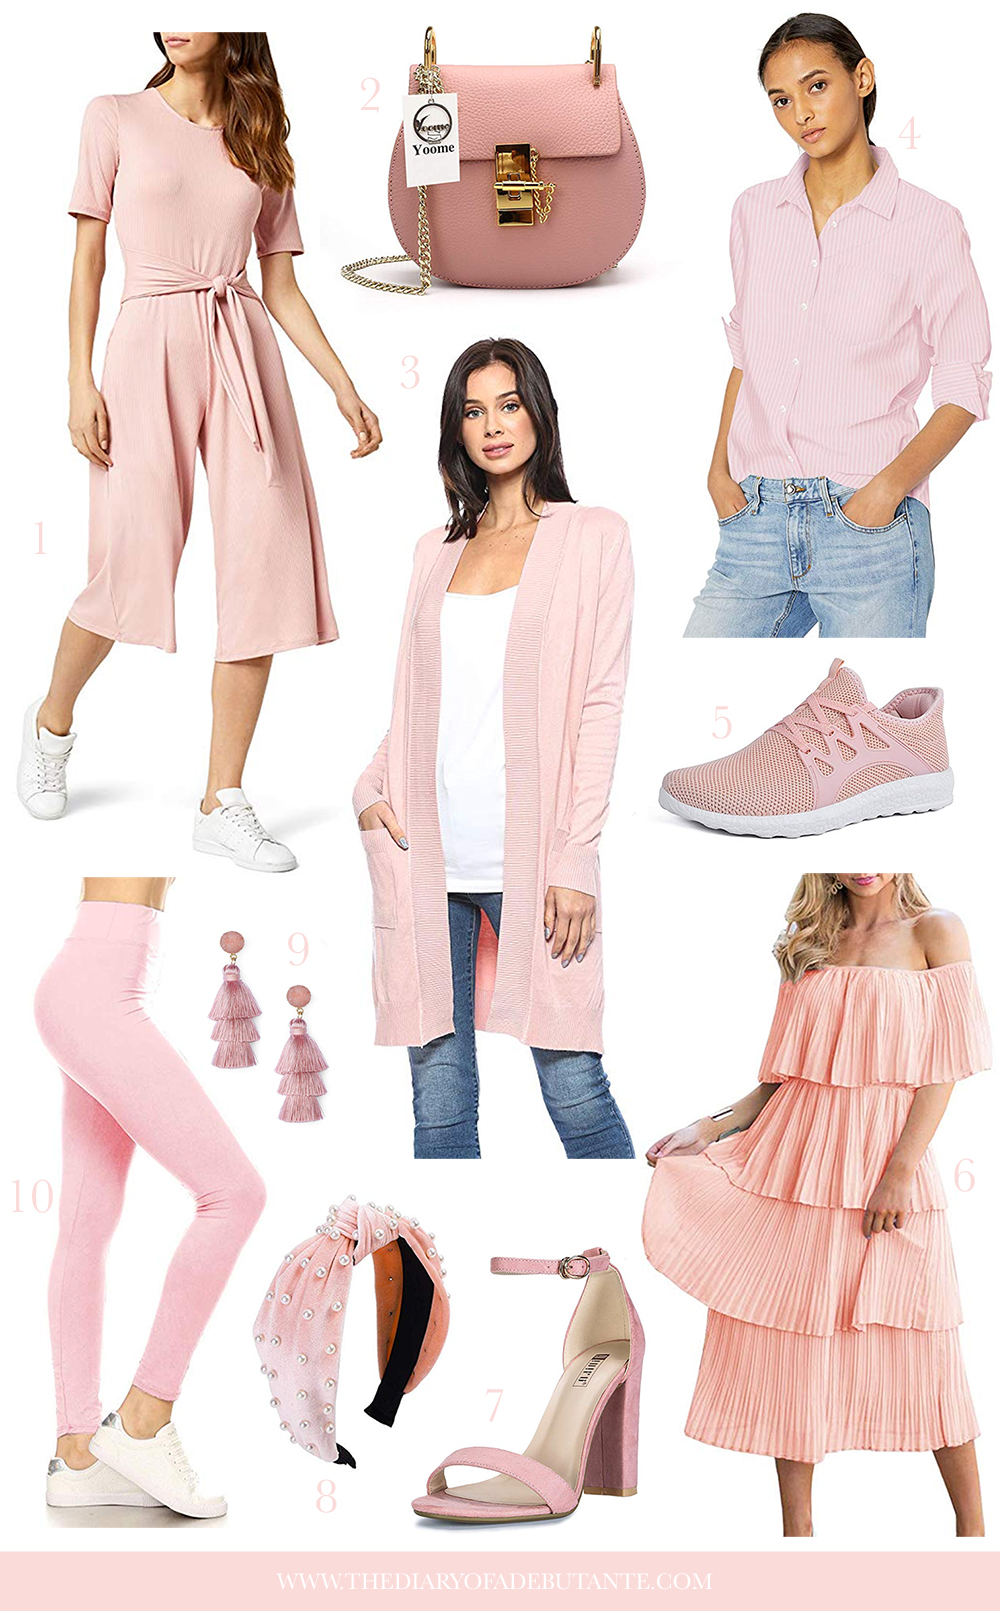 The Cutest Pink Fashion Finds on Amazon under $50 by affordable fashion blogger Stephanie Ziajka on Diary of a Debutante, Amazon Fall Fashion Finds, Best Amazon Fashion Finds